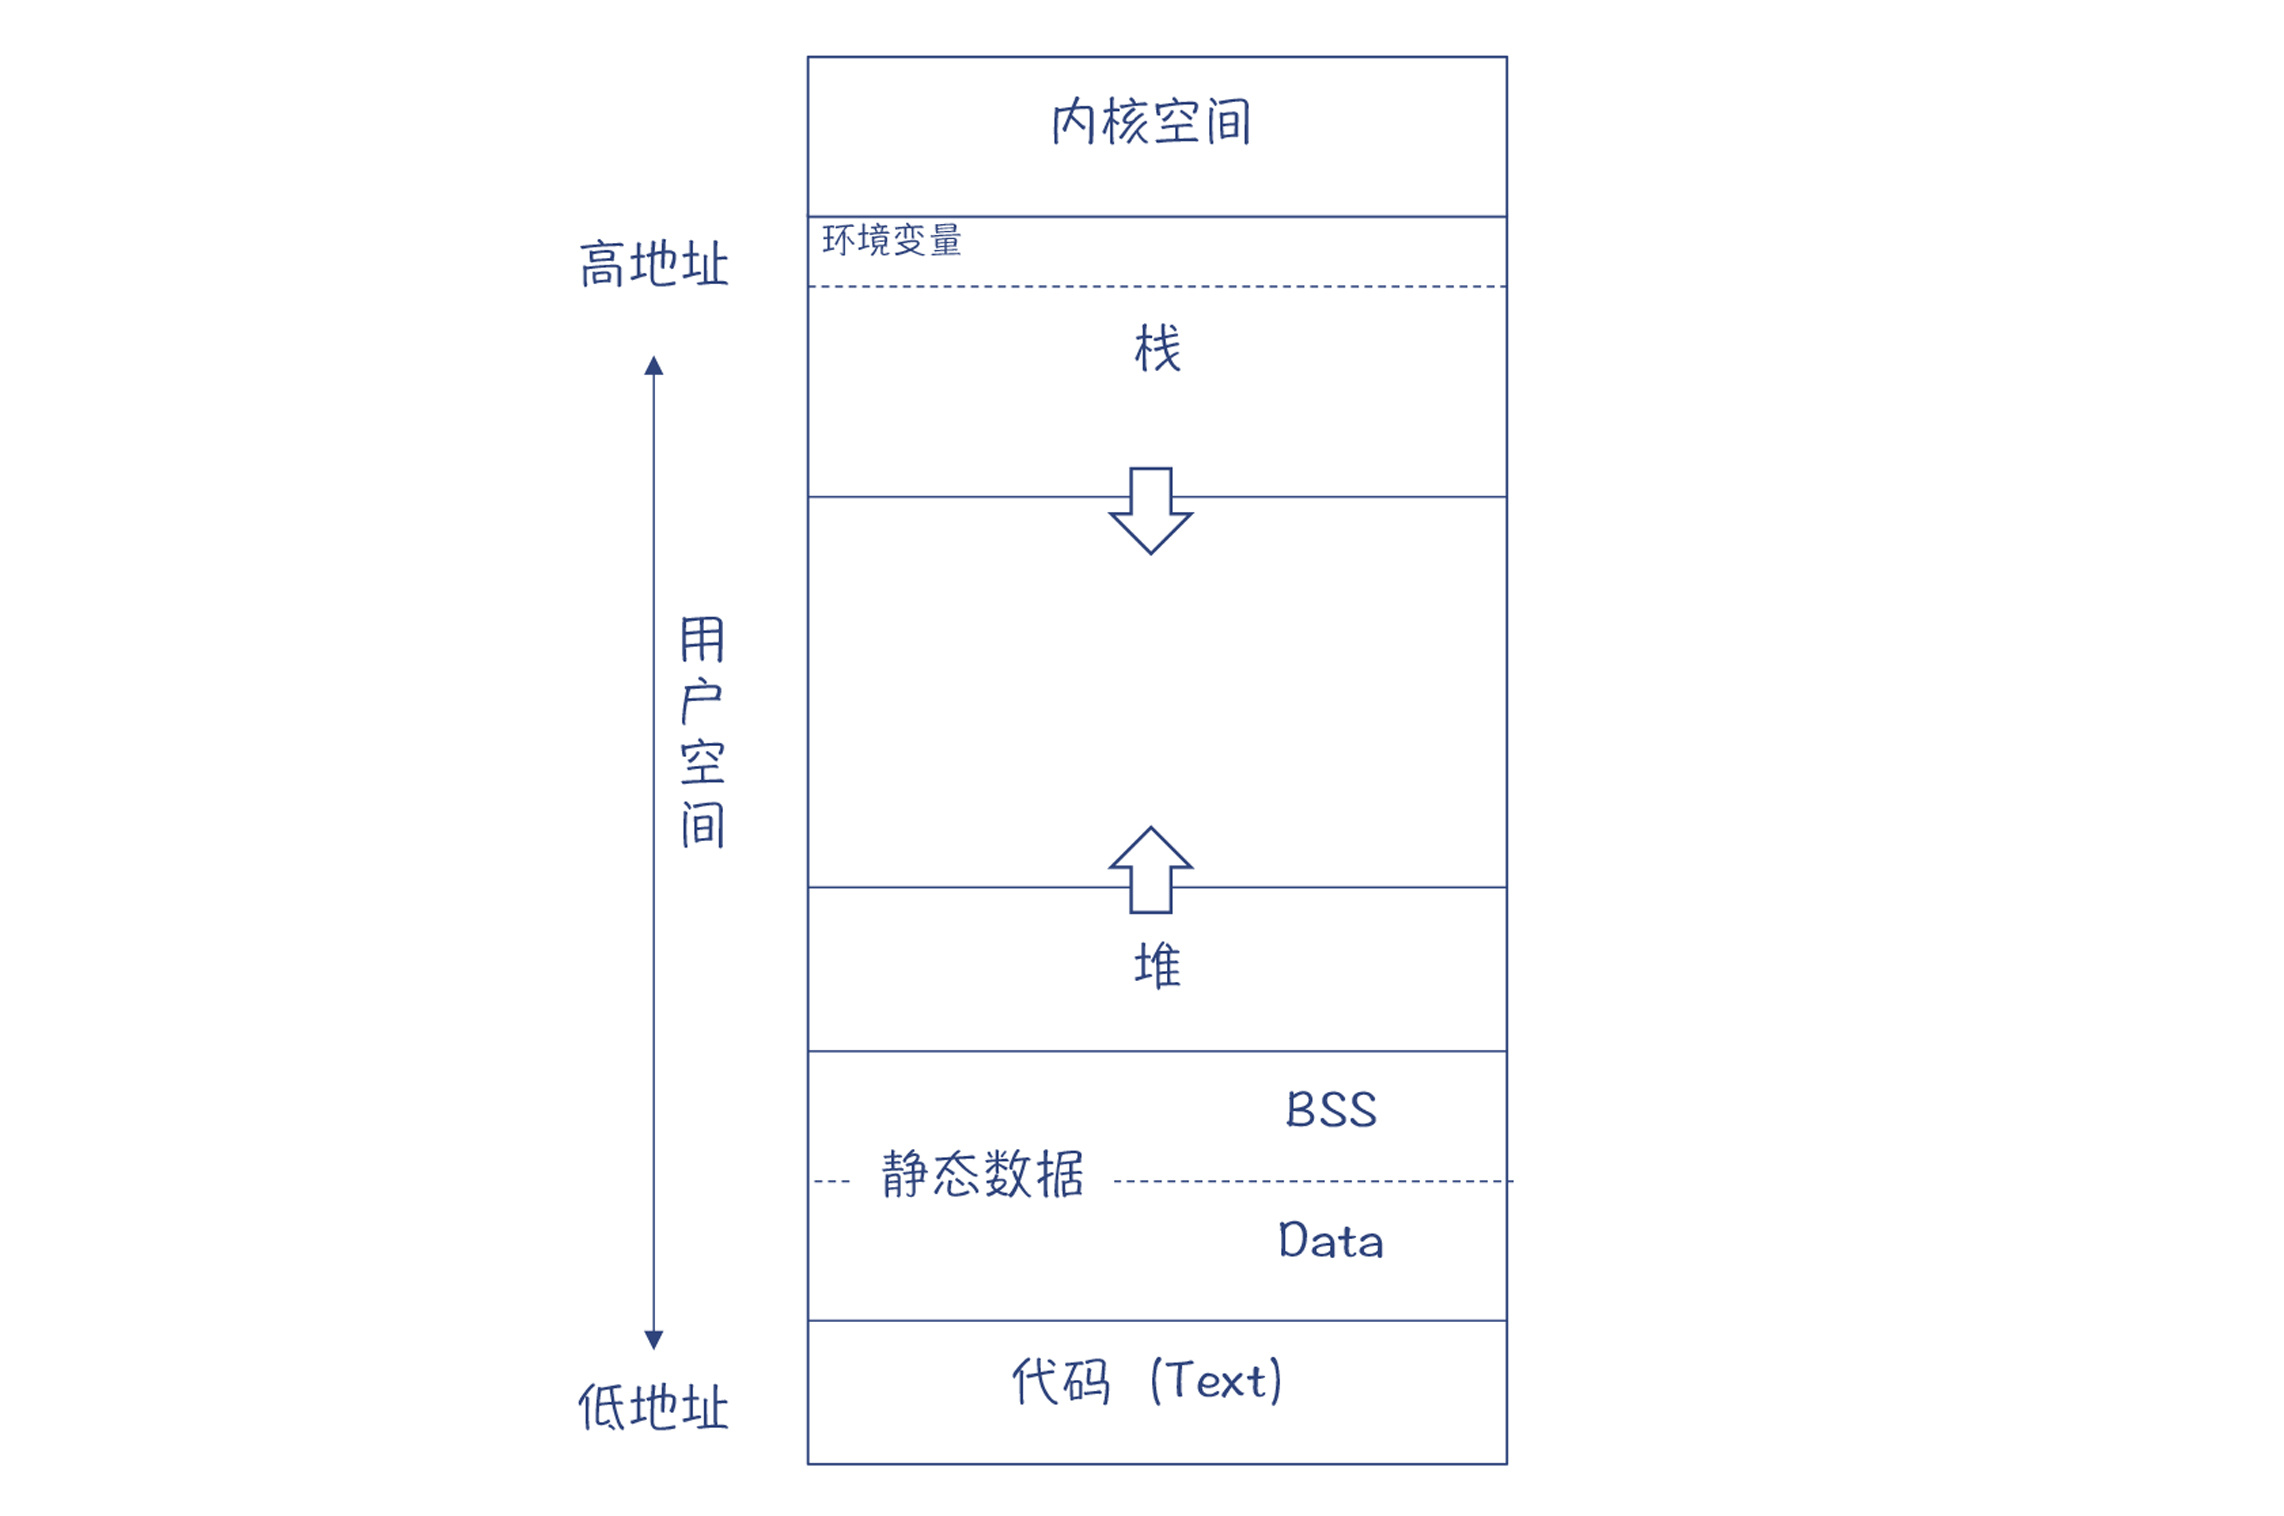 https://img.zhaoweiguo.com/knowledge/images/cores/compilers/memory_layout1.jpeg